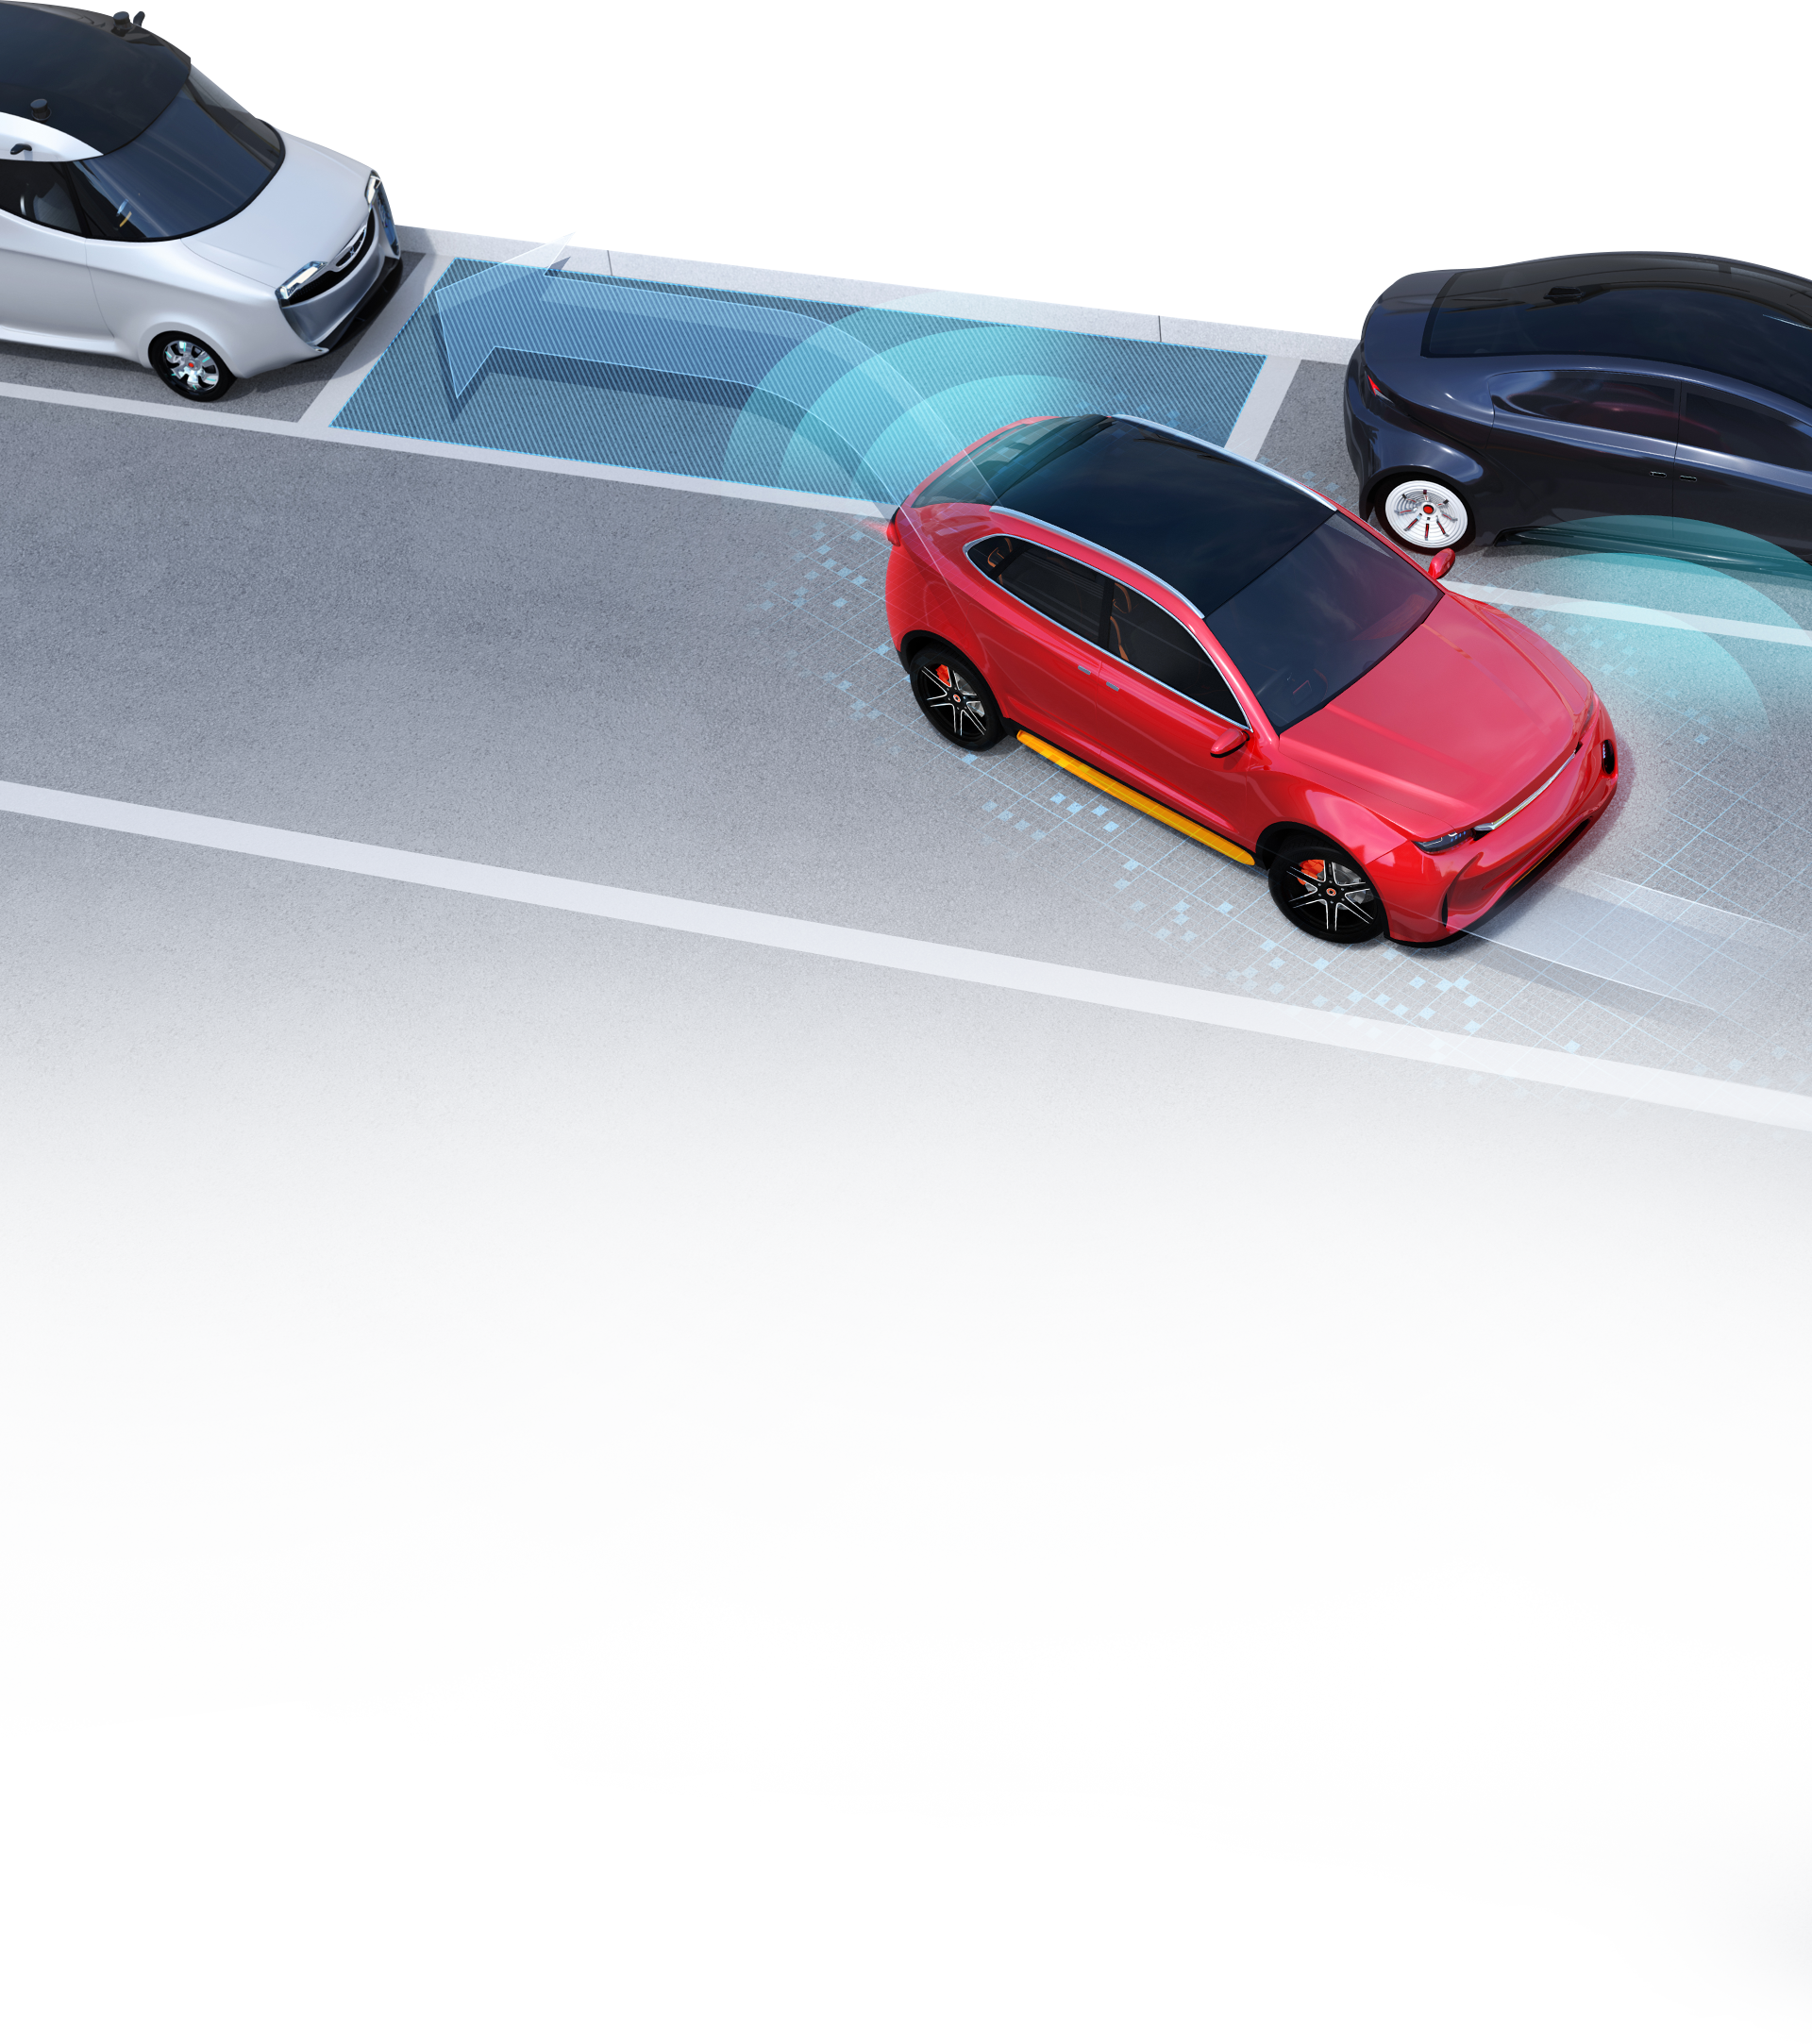 V-ADAS: Vision Advanced Driver Assistance Systems